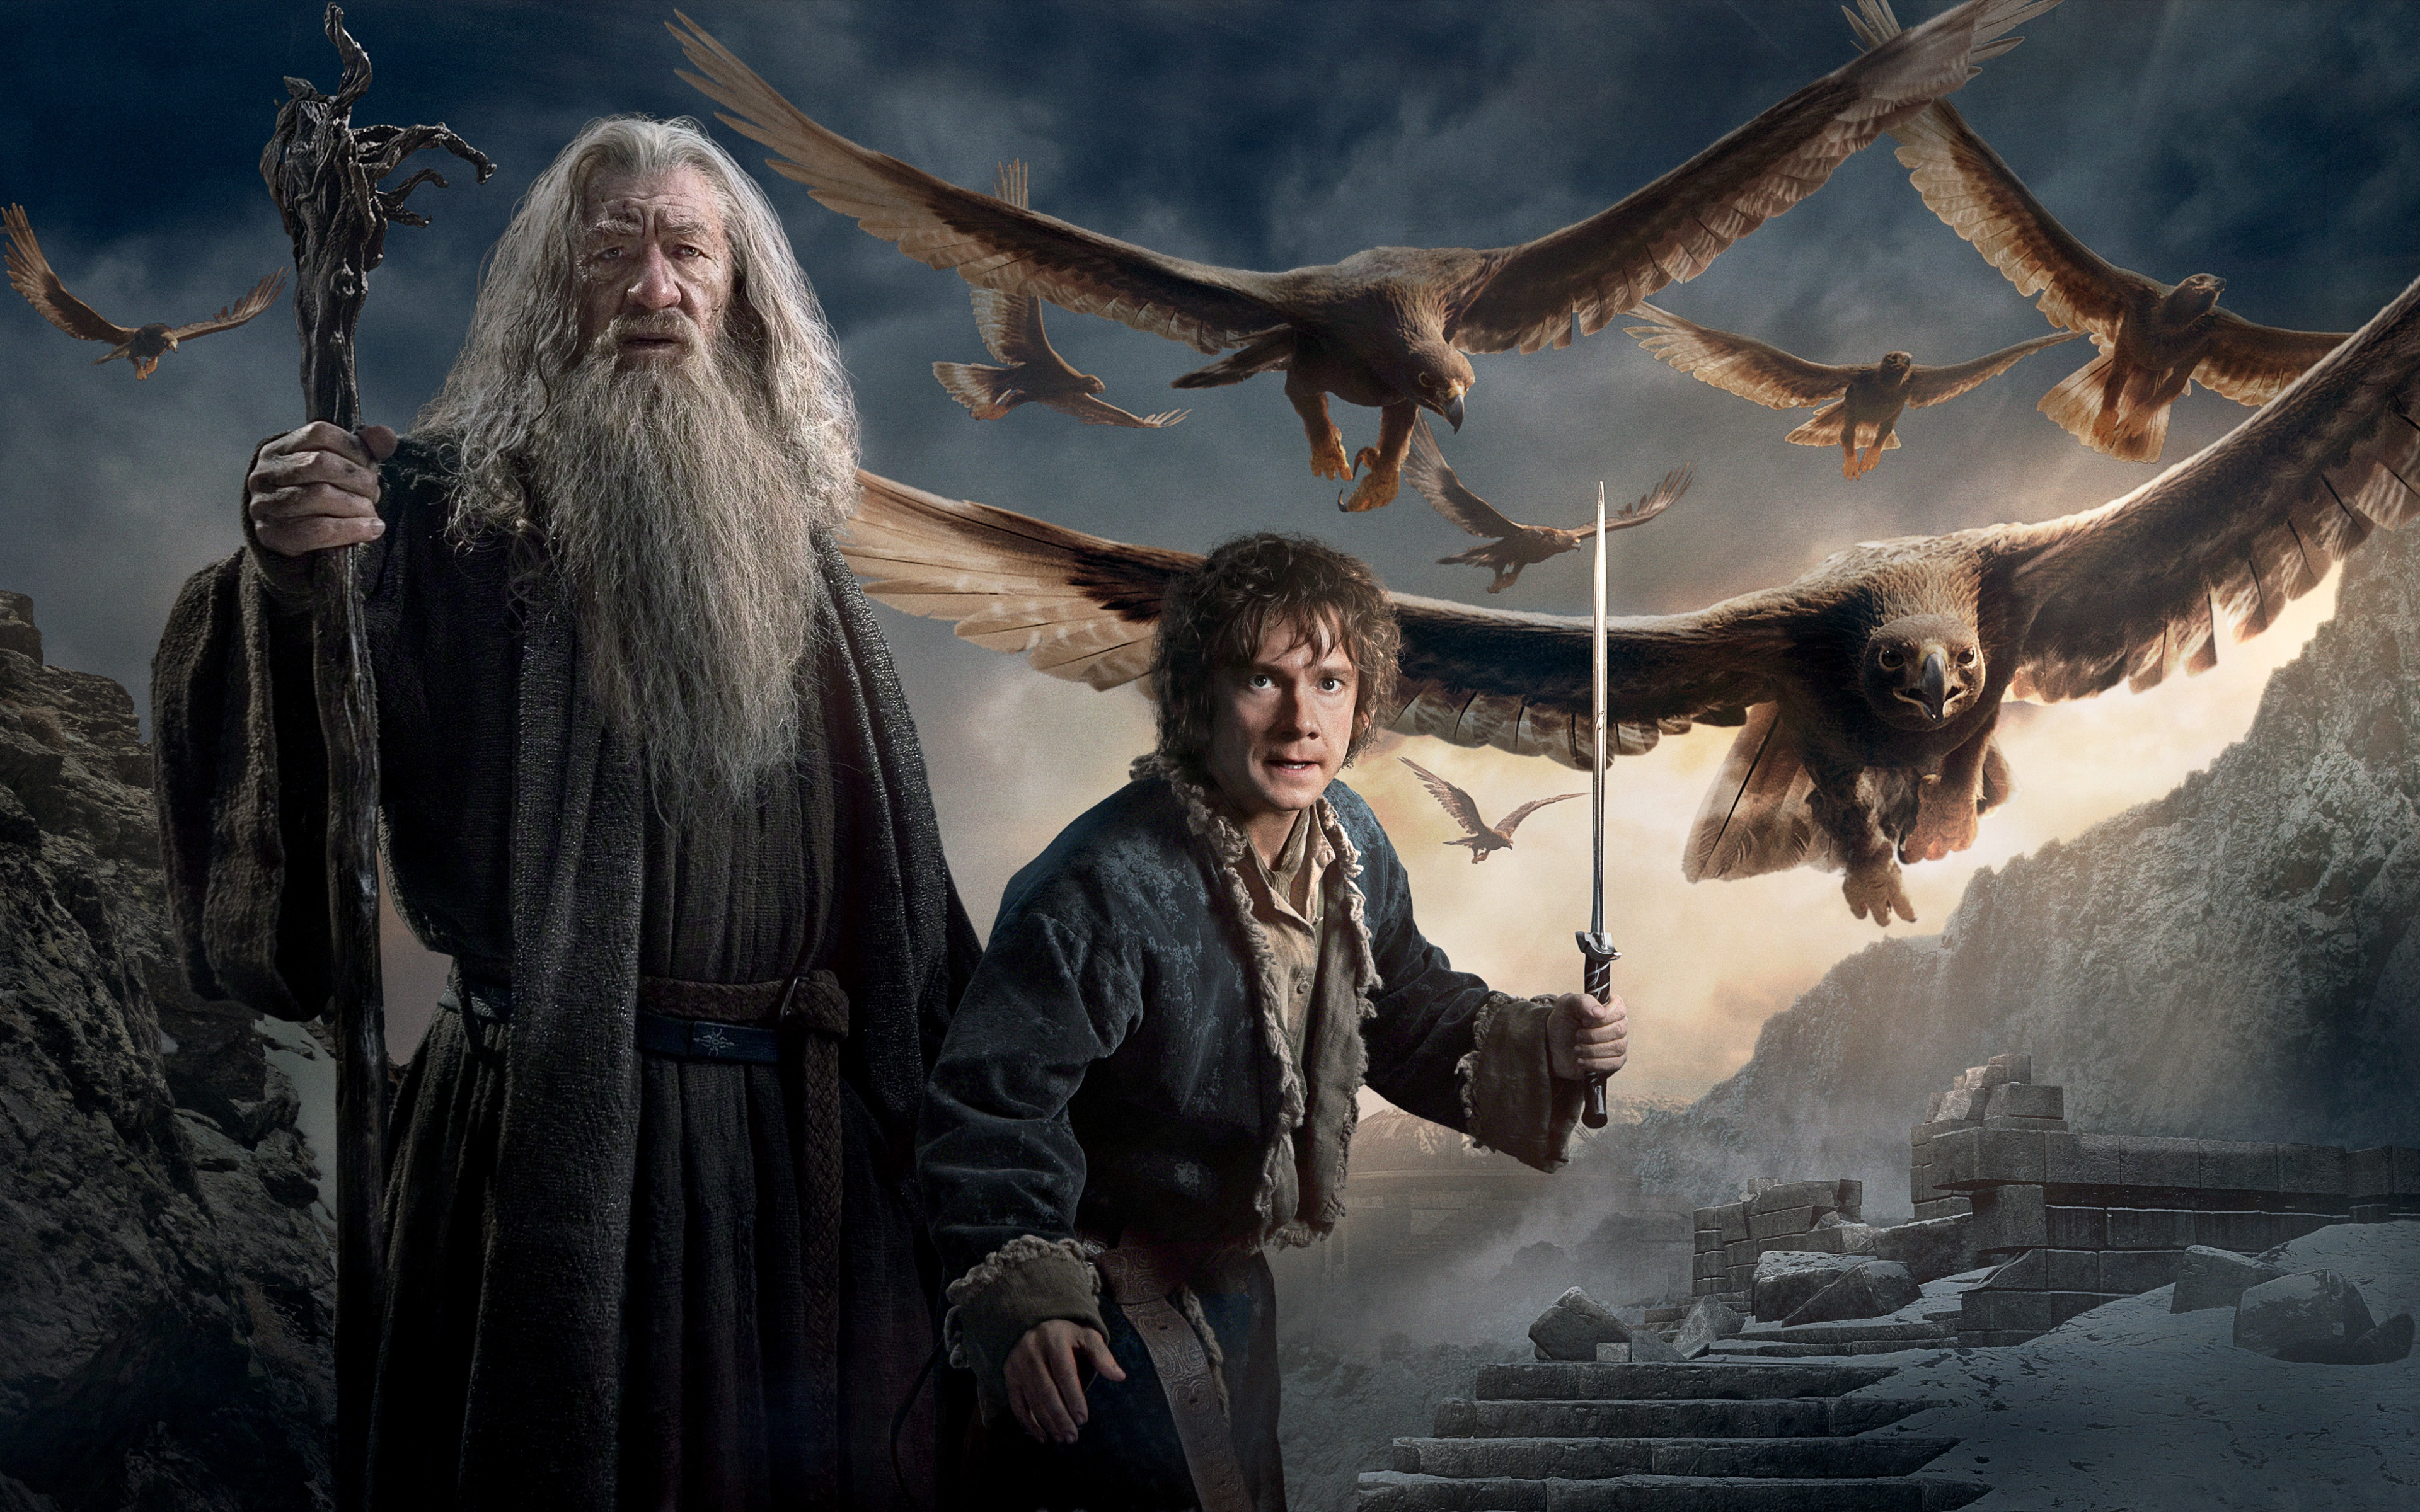 lord of the rings, the lord of the rings, movie, the hobbit: the battle of the five armies, beard, eagle, gandalf, sword